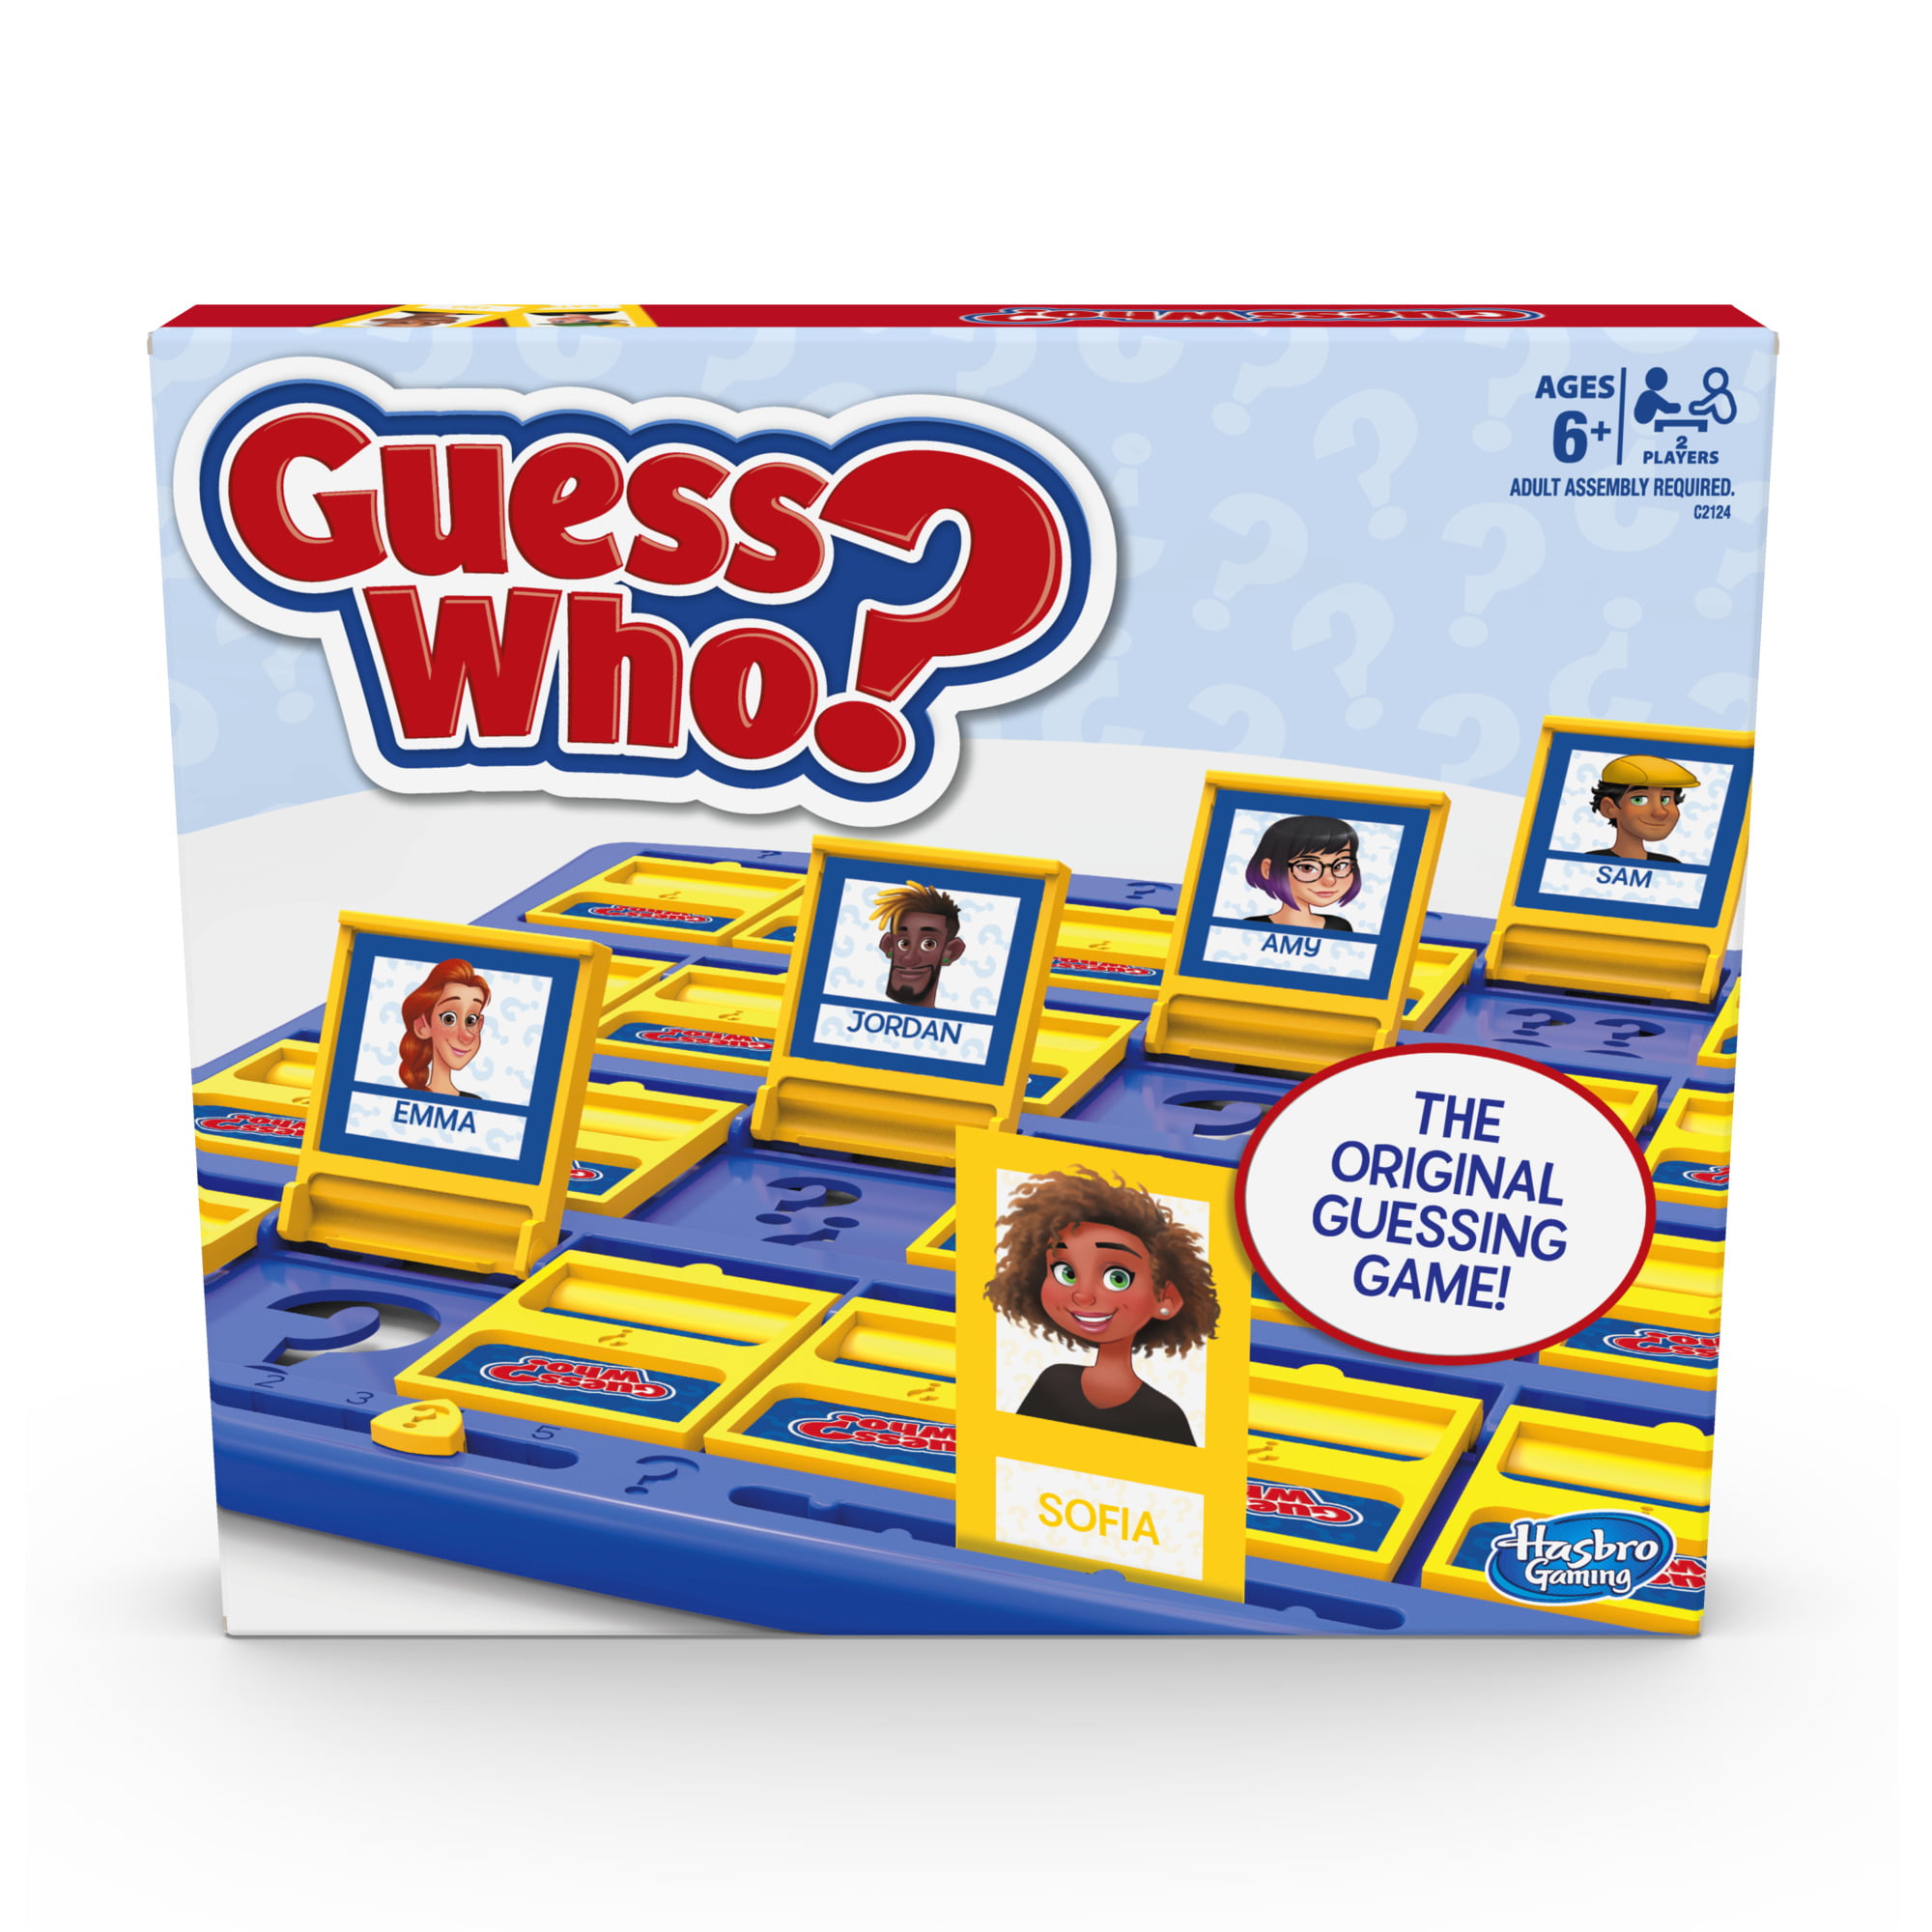 1998 GUESS WHO BOARD GAME PIECES 24 CARD SET 